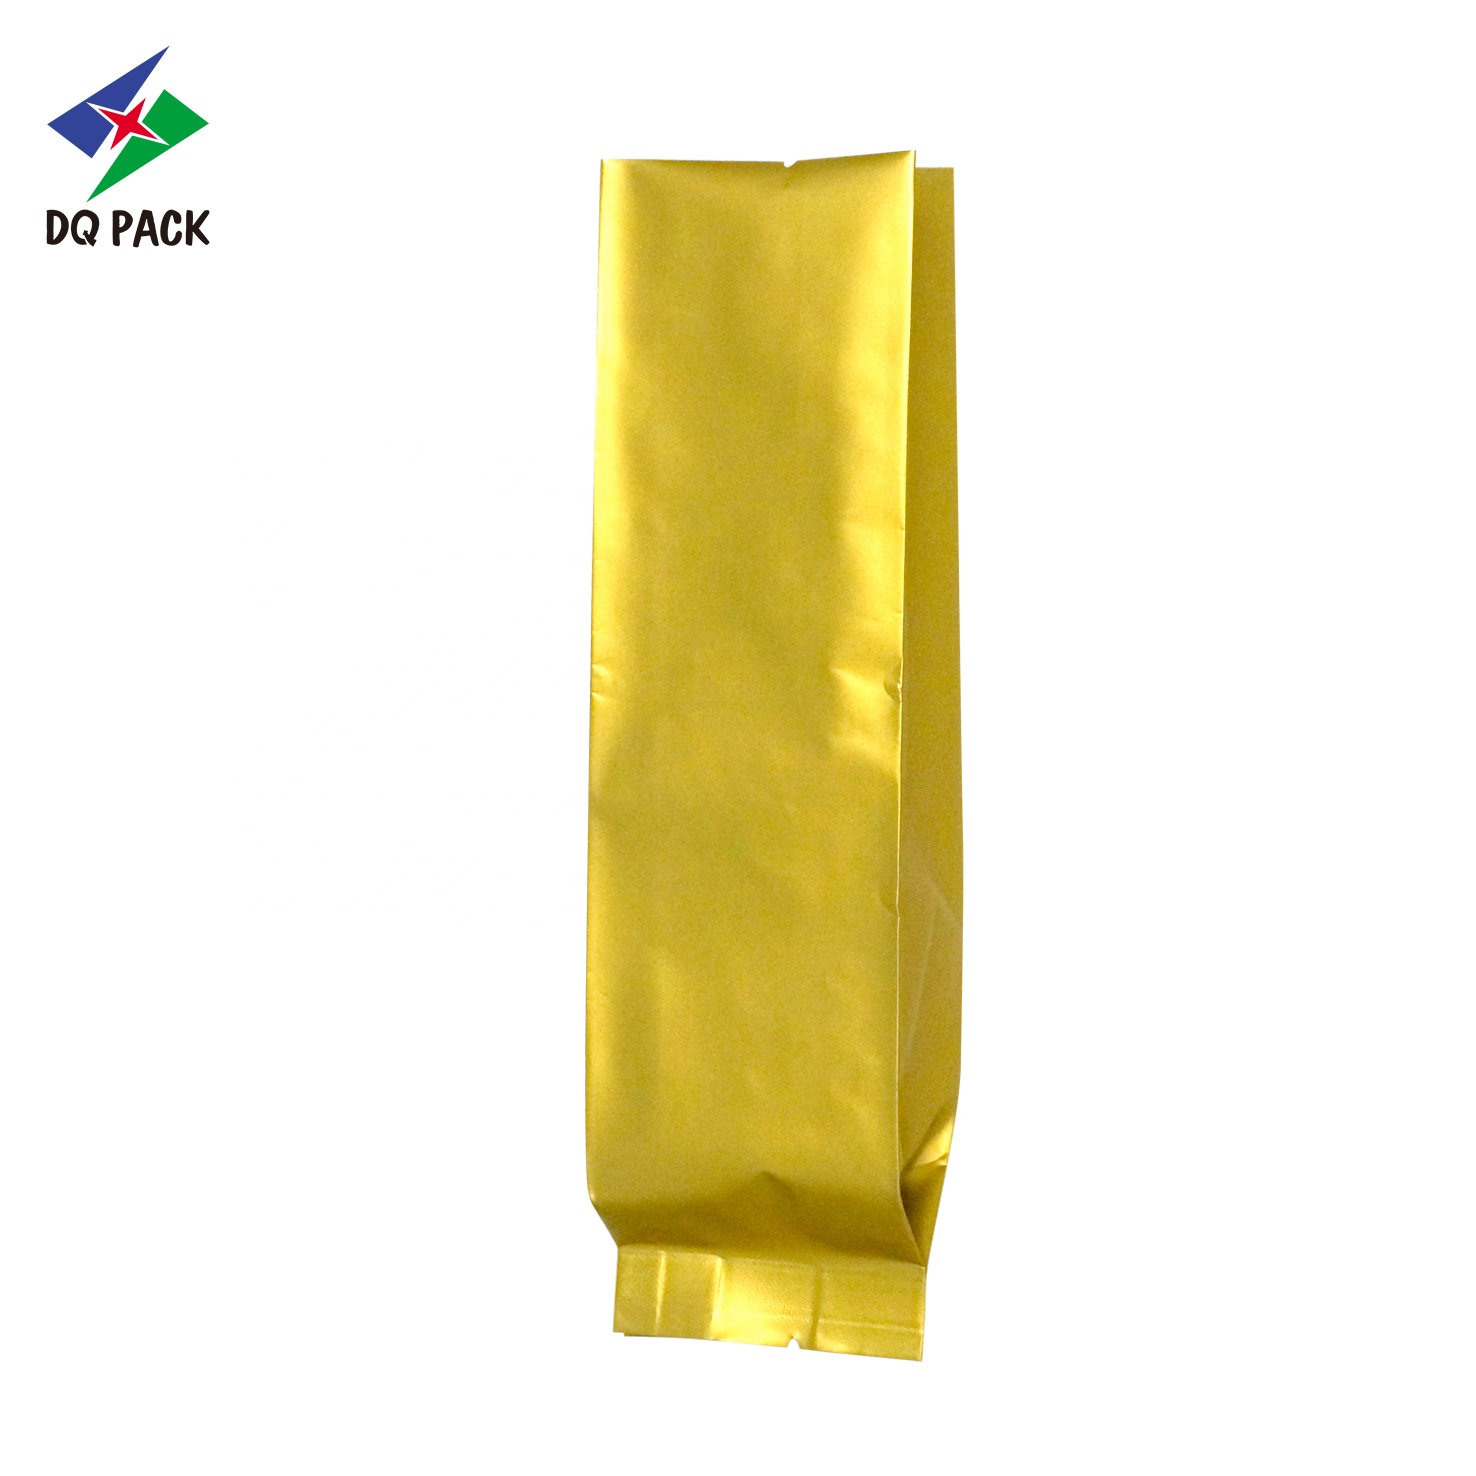 DQ PACK China Factory Direct Price Side Gusset Bag for tea  coffee packaging